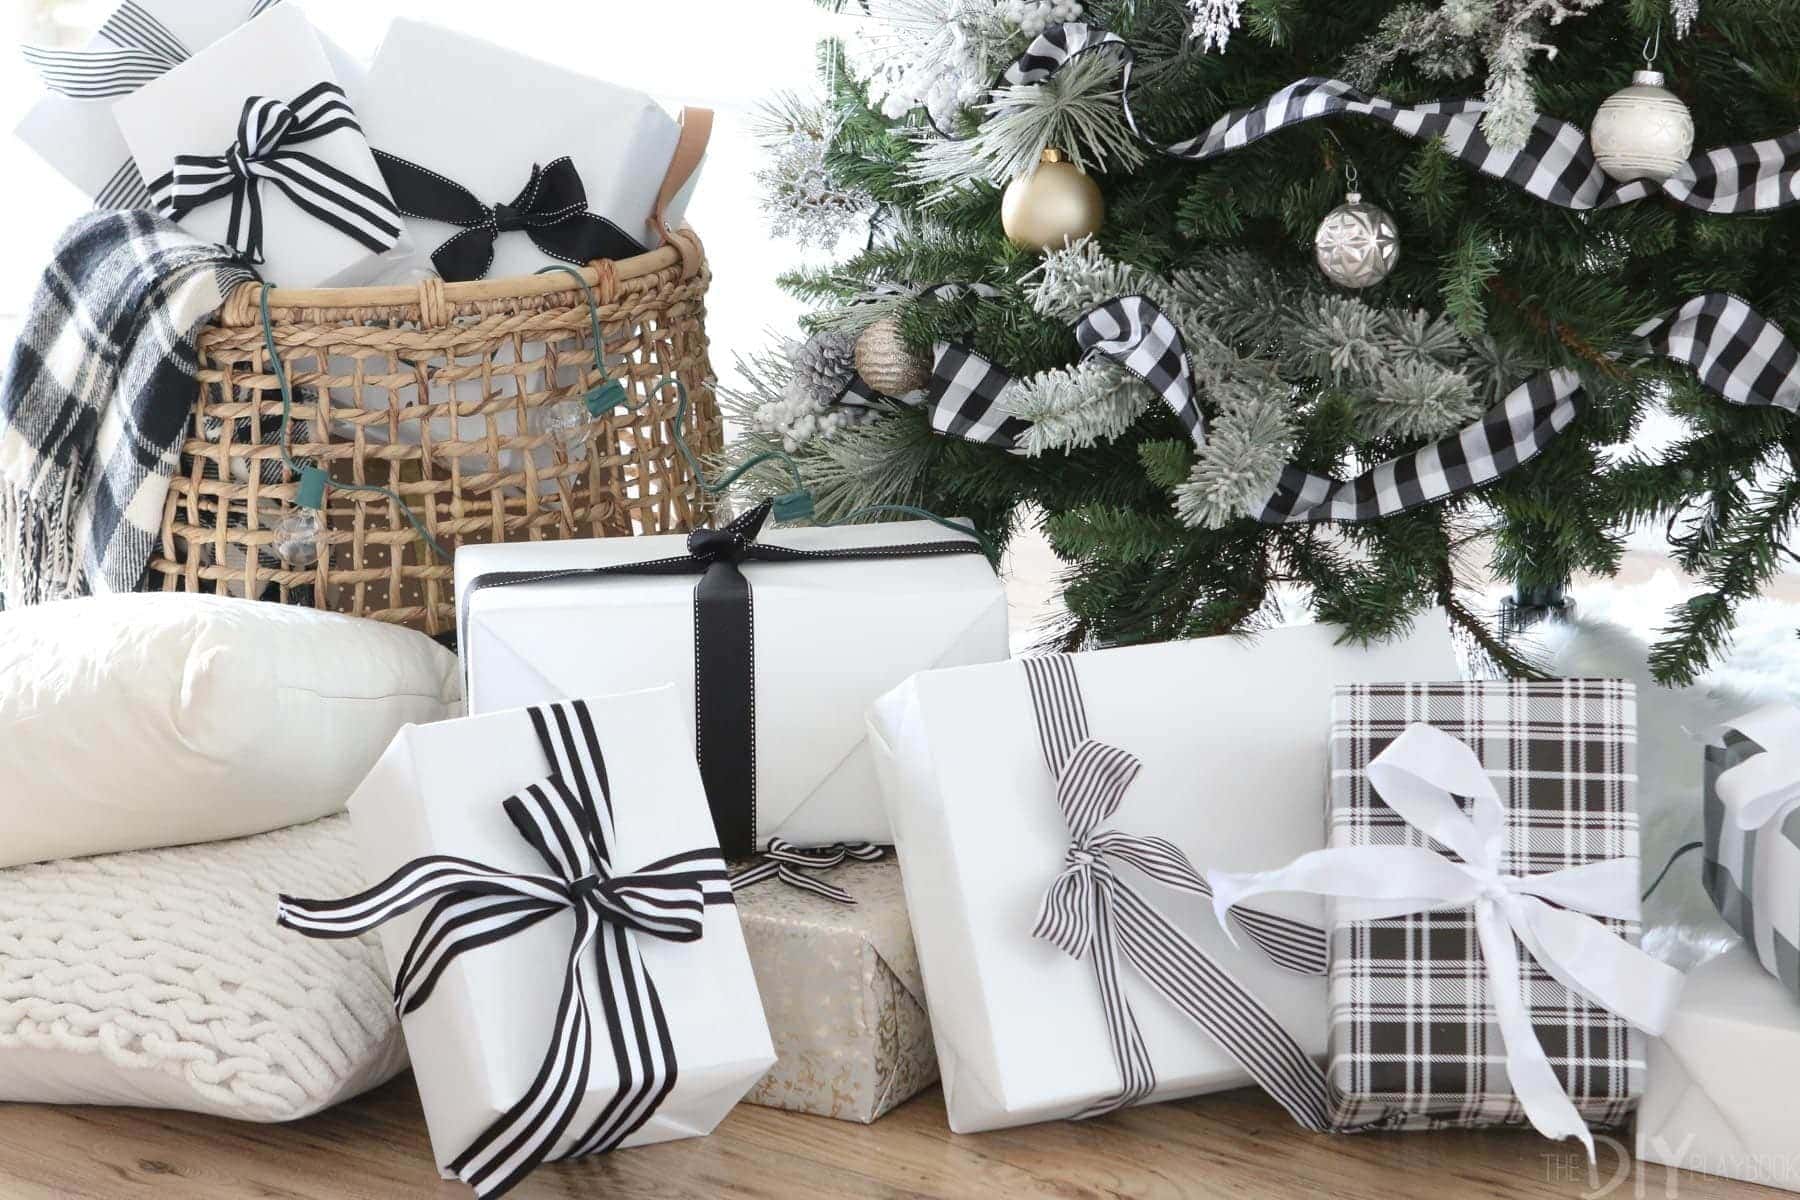 Finding the perfect gift can be a difficult task